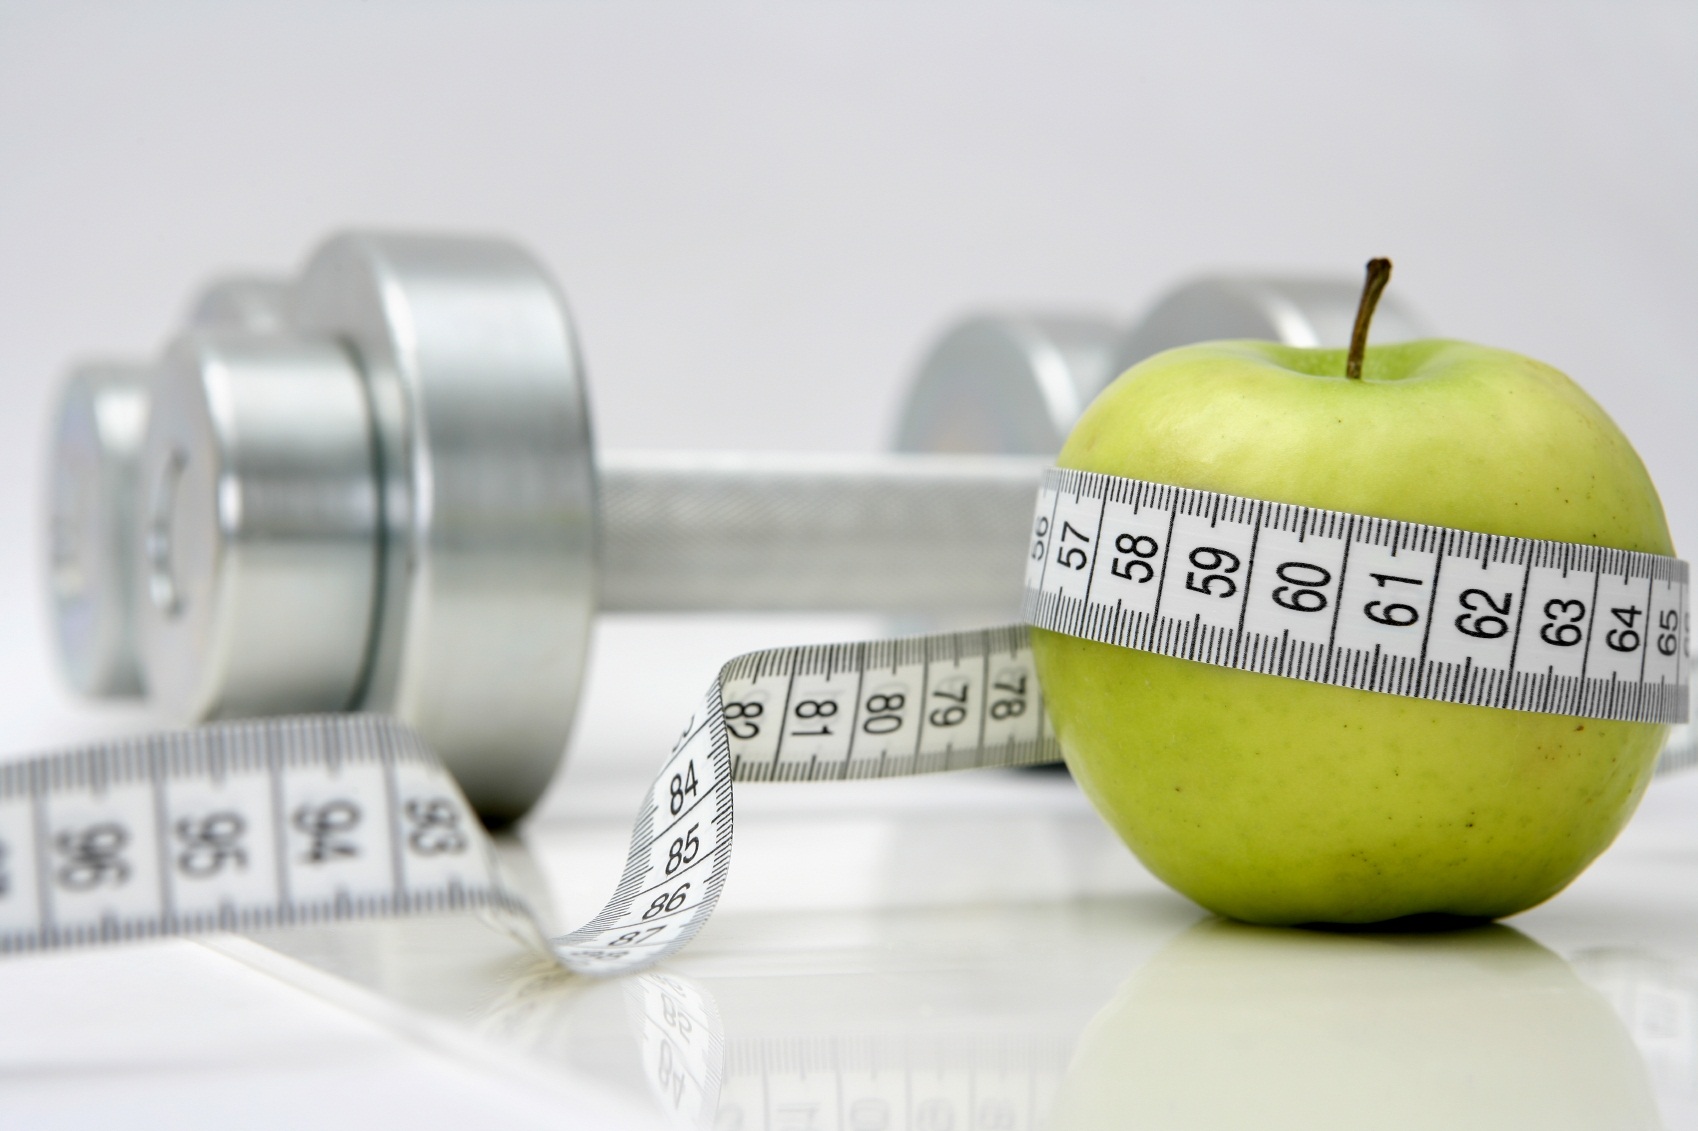 A picture of measuring tape, an apple, and a pair of dumbbells